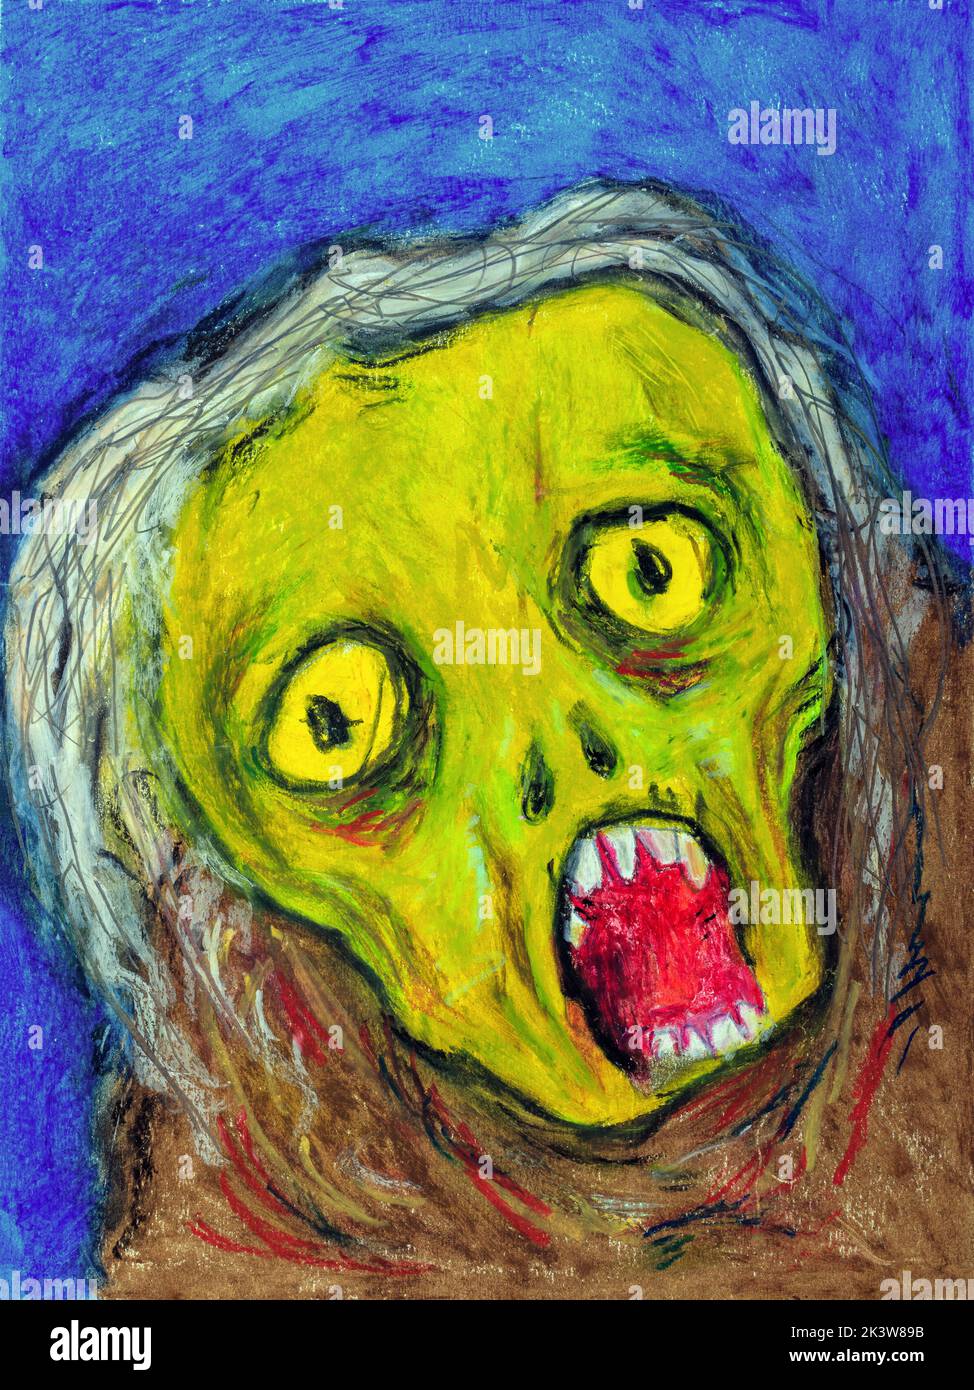 A face of a scary ghoul ghost screaming and terrifying. Halloween October holiday concept. Illustration art, oil pastel drawing with dark blue backgro Stock Photo